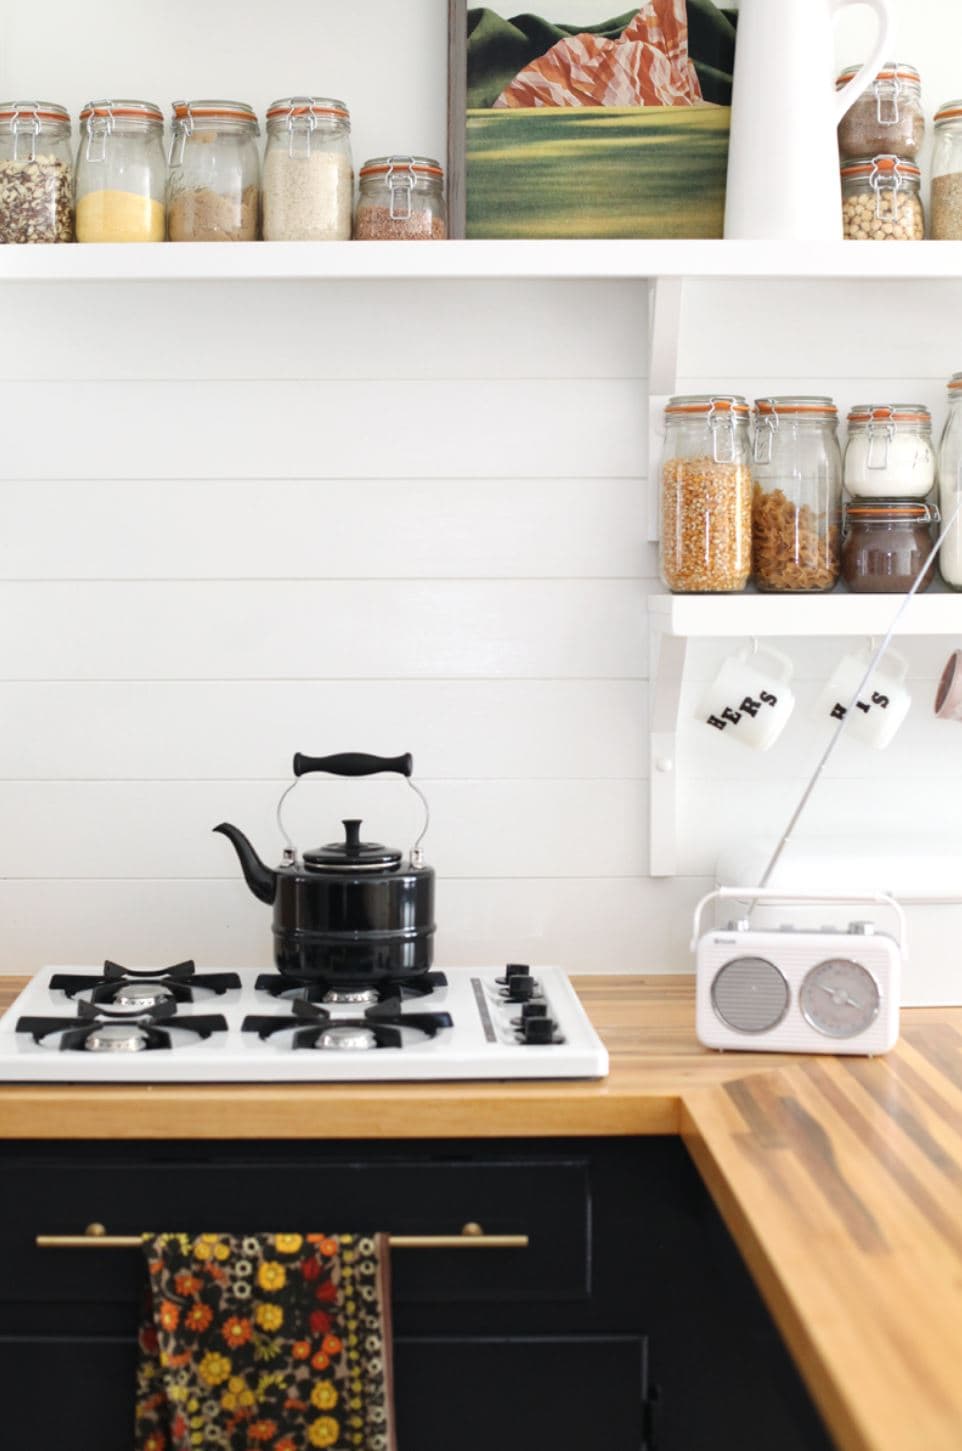 A kitchen with a shiplap backsplash, wood countertops, and black cupboards.